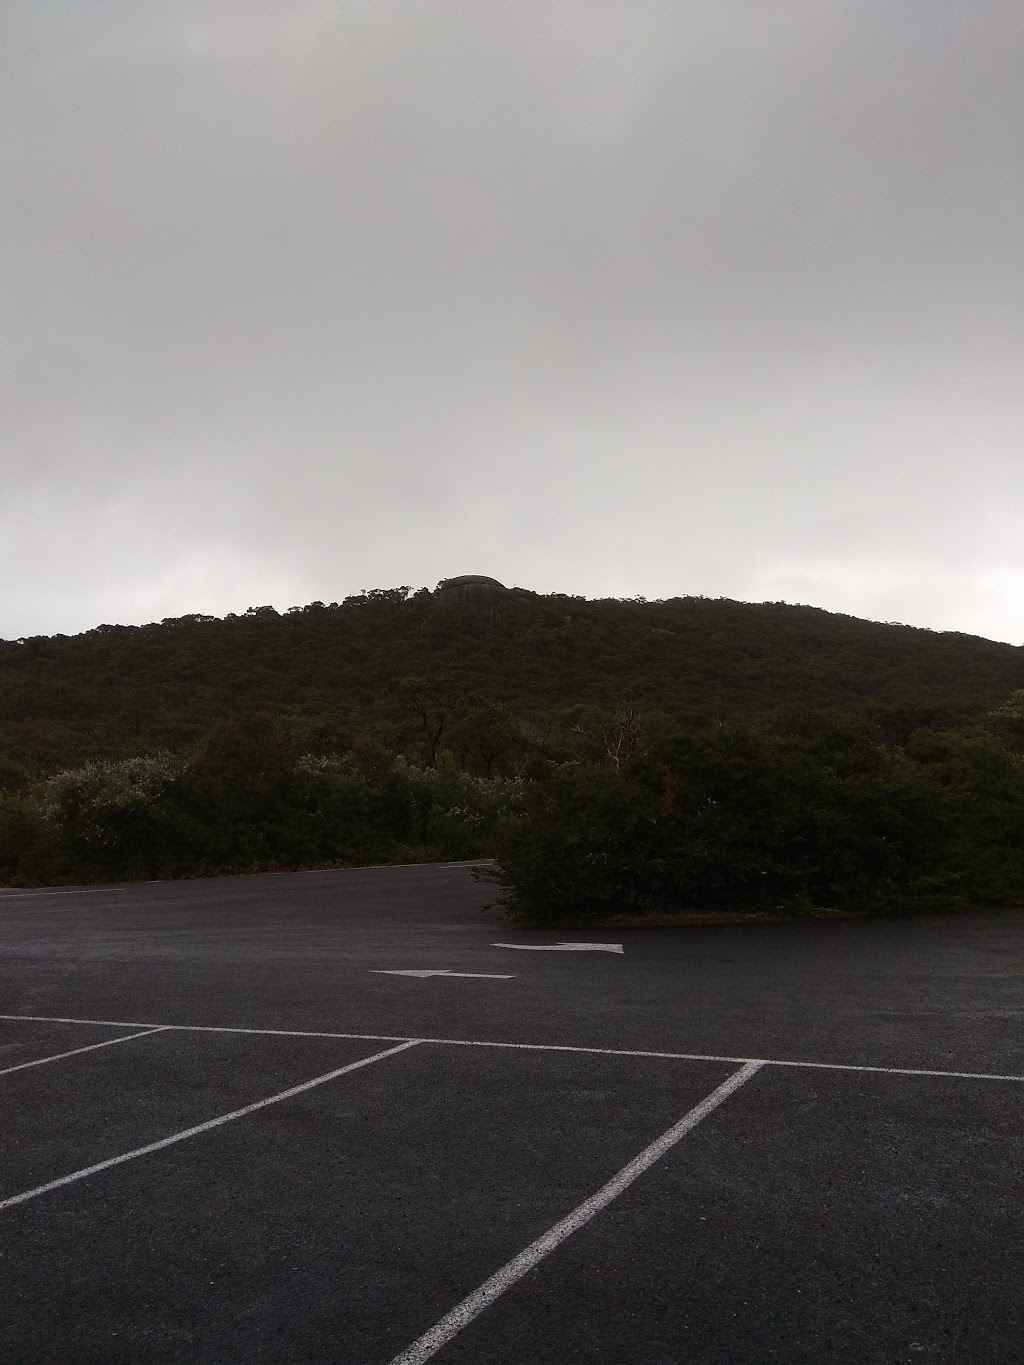 Lilly Pilly Gully Car Park | parking | Wilsons Promontory Rd, Wilsons Promontory VIC 3960, Australia | 131963 OR +61 131963